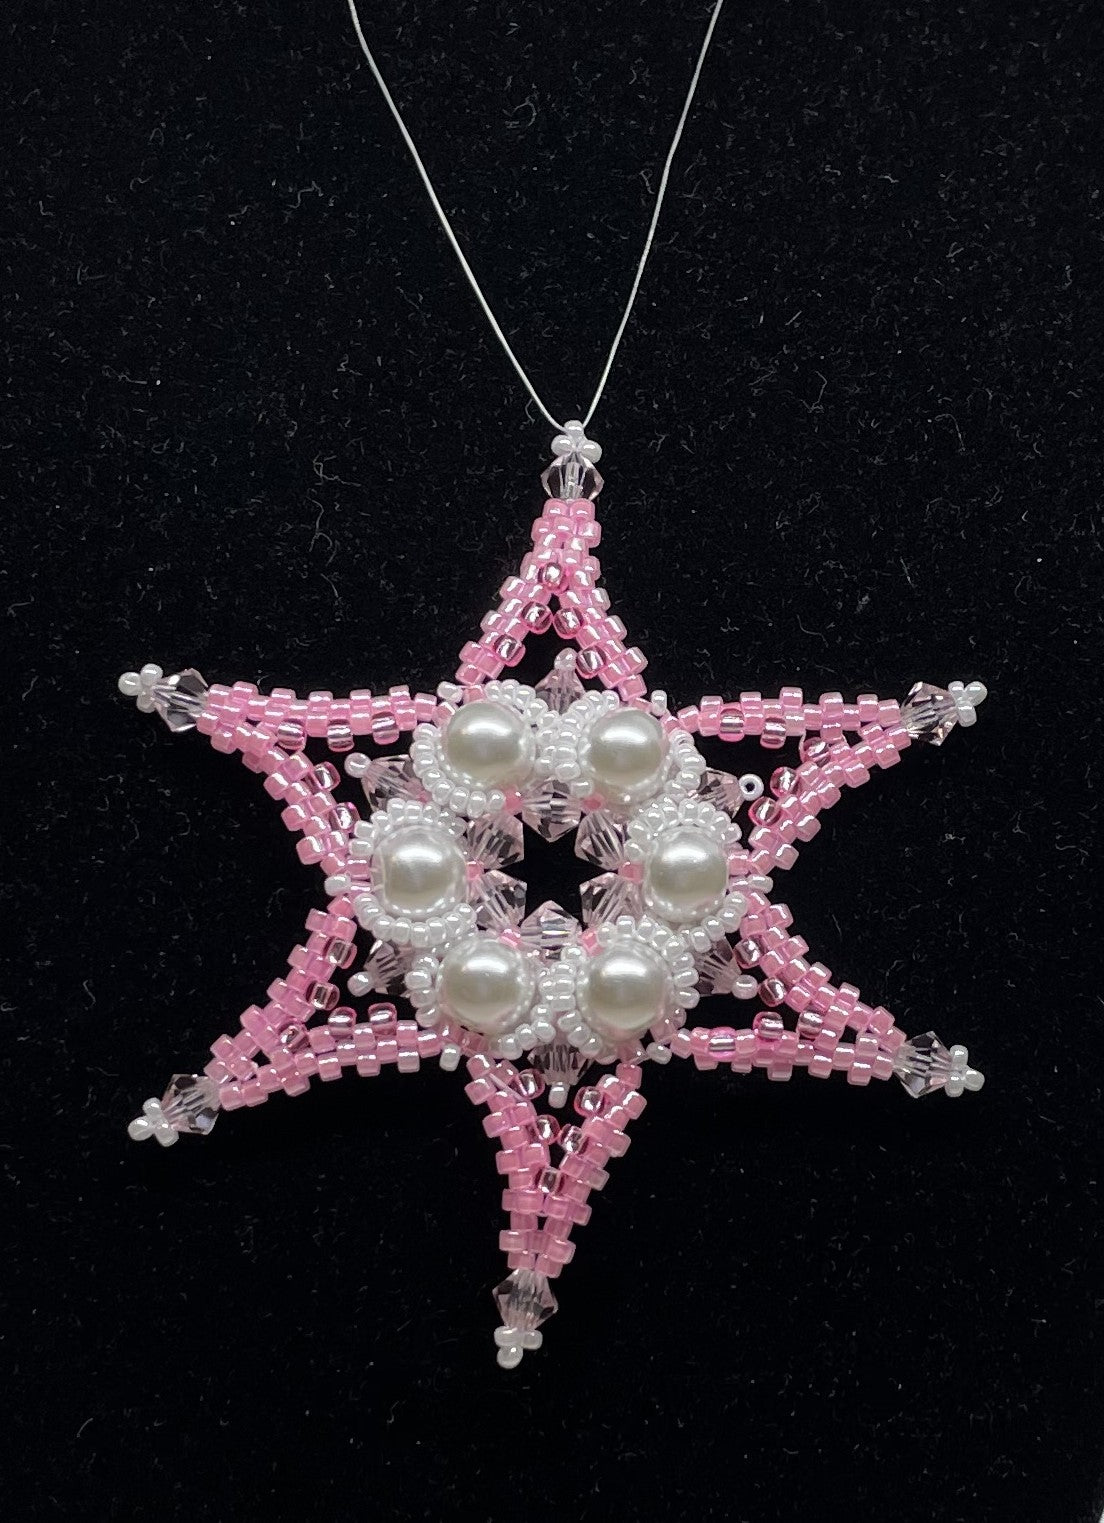 Twinkle Star Ornament - Pink